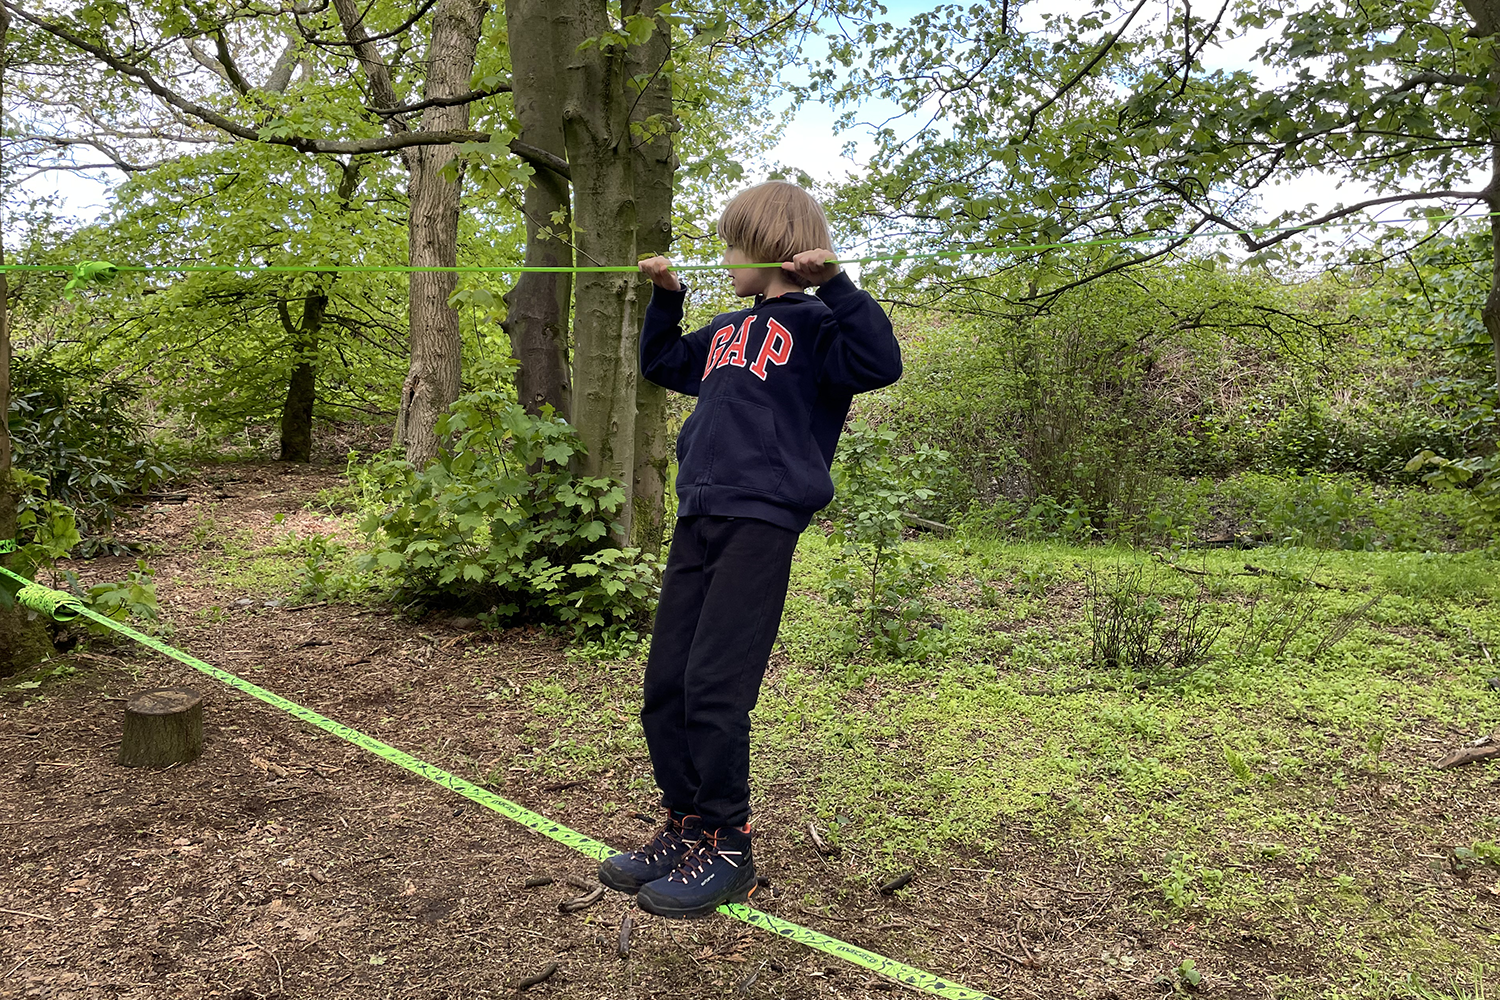 Toby on the slack line in the woods